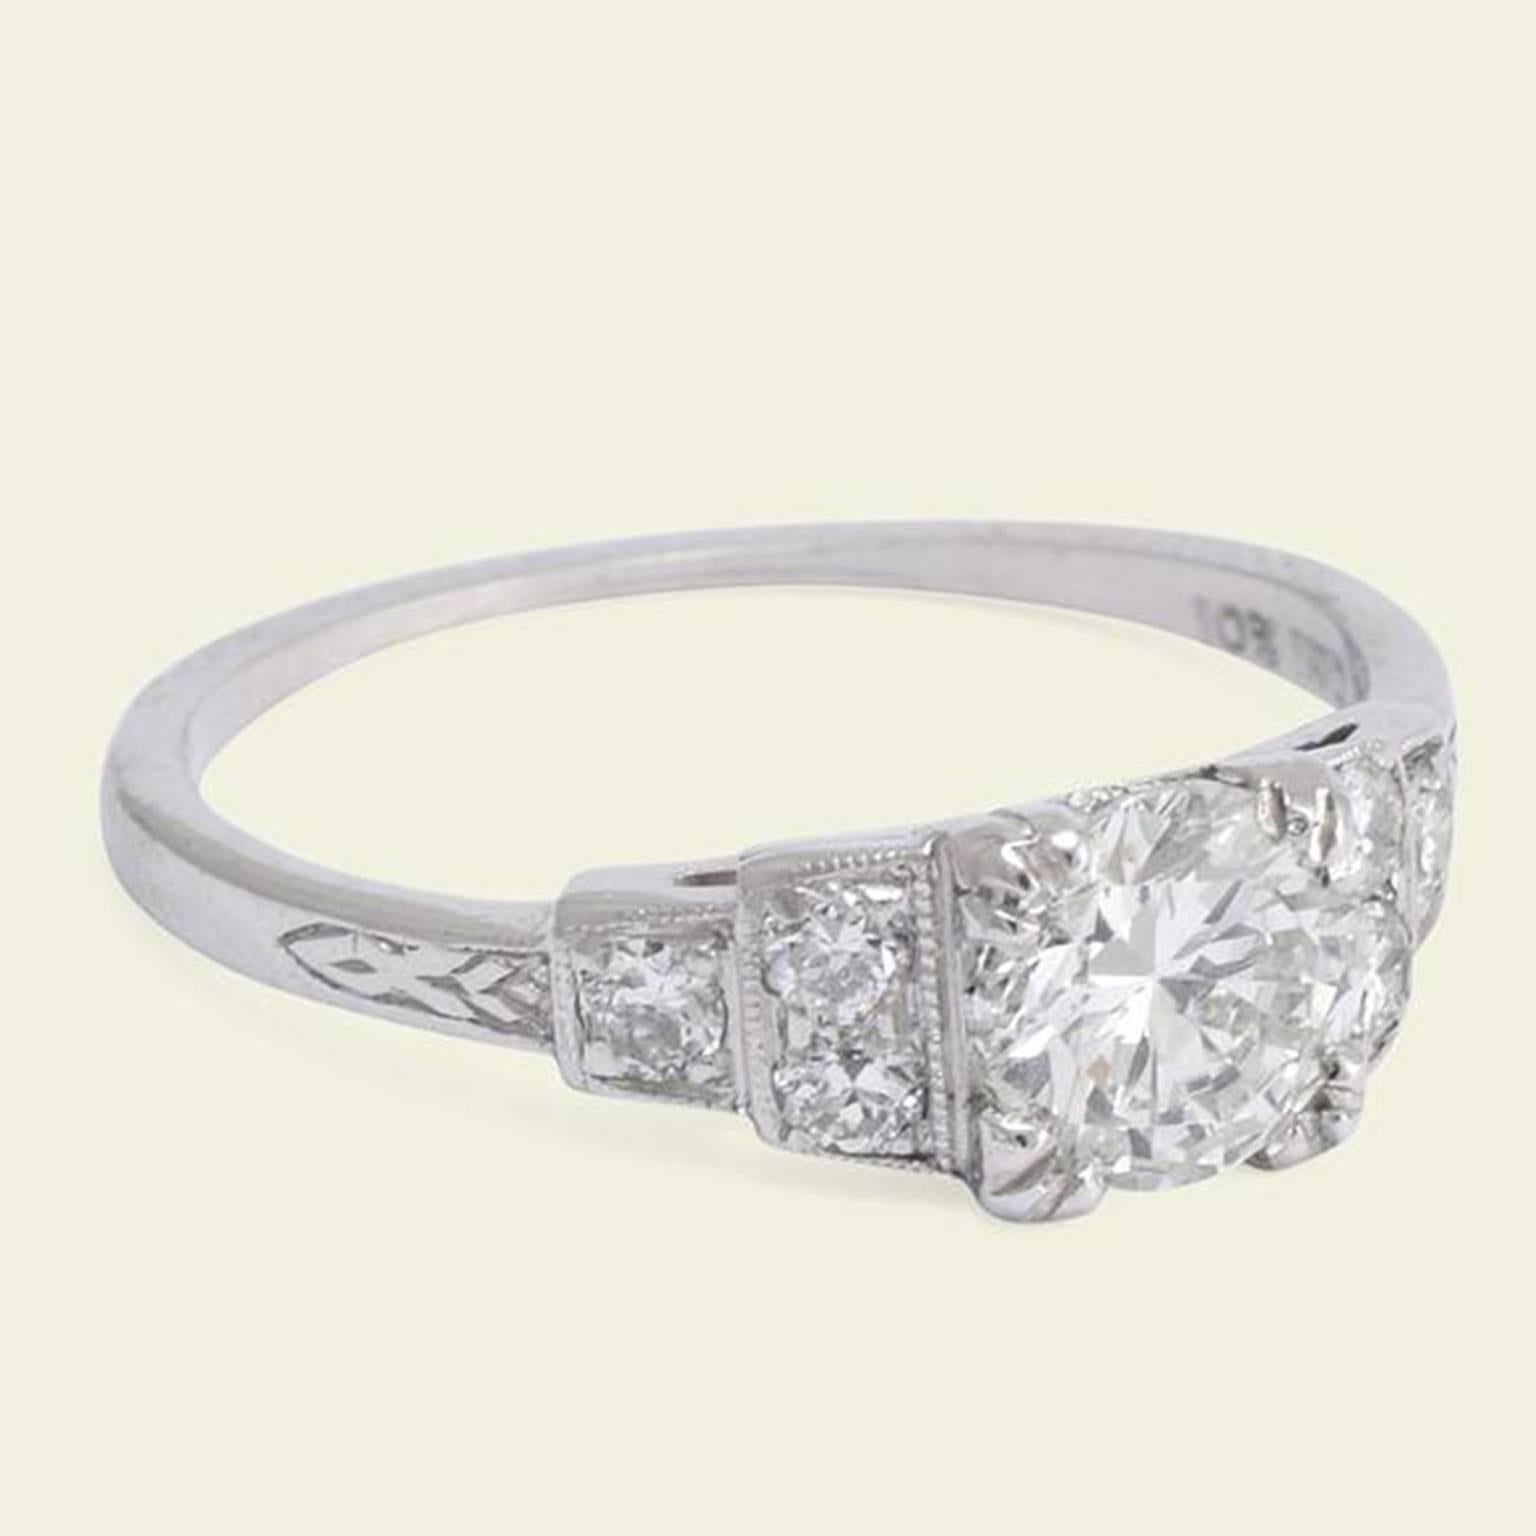 This 1920s engagement ring is made in platinum with a .72ct transitional cut diamond (F-G/VS2). The stepped shoulders are set with a total of six old European cut diamonds and feature subtle engraving where they meet the hoop. This ring comes with